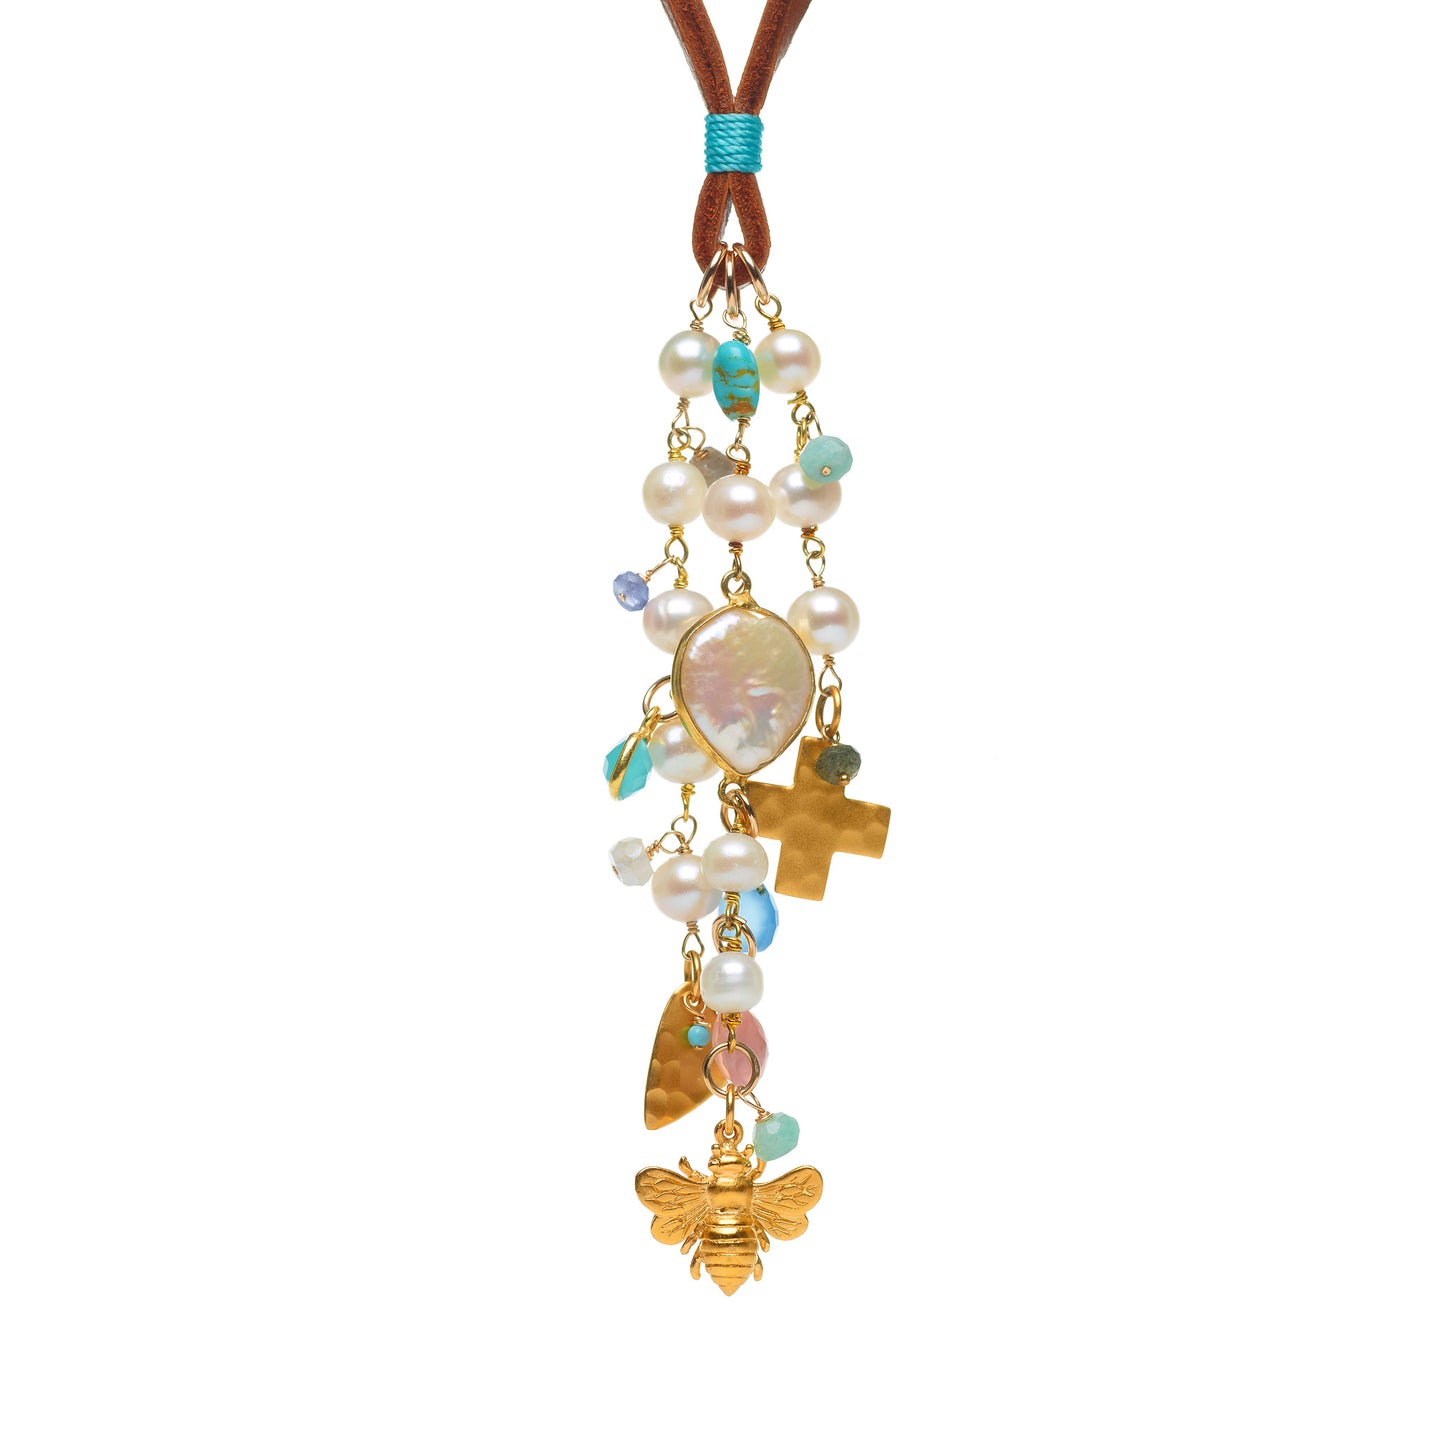 Mixed Charm Bundle on Suede with Turquoise and Pearls